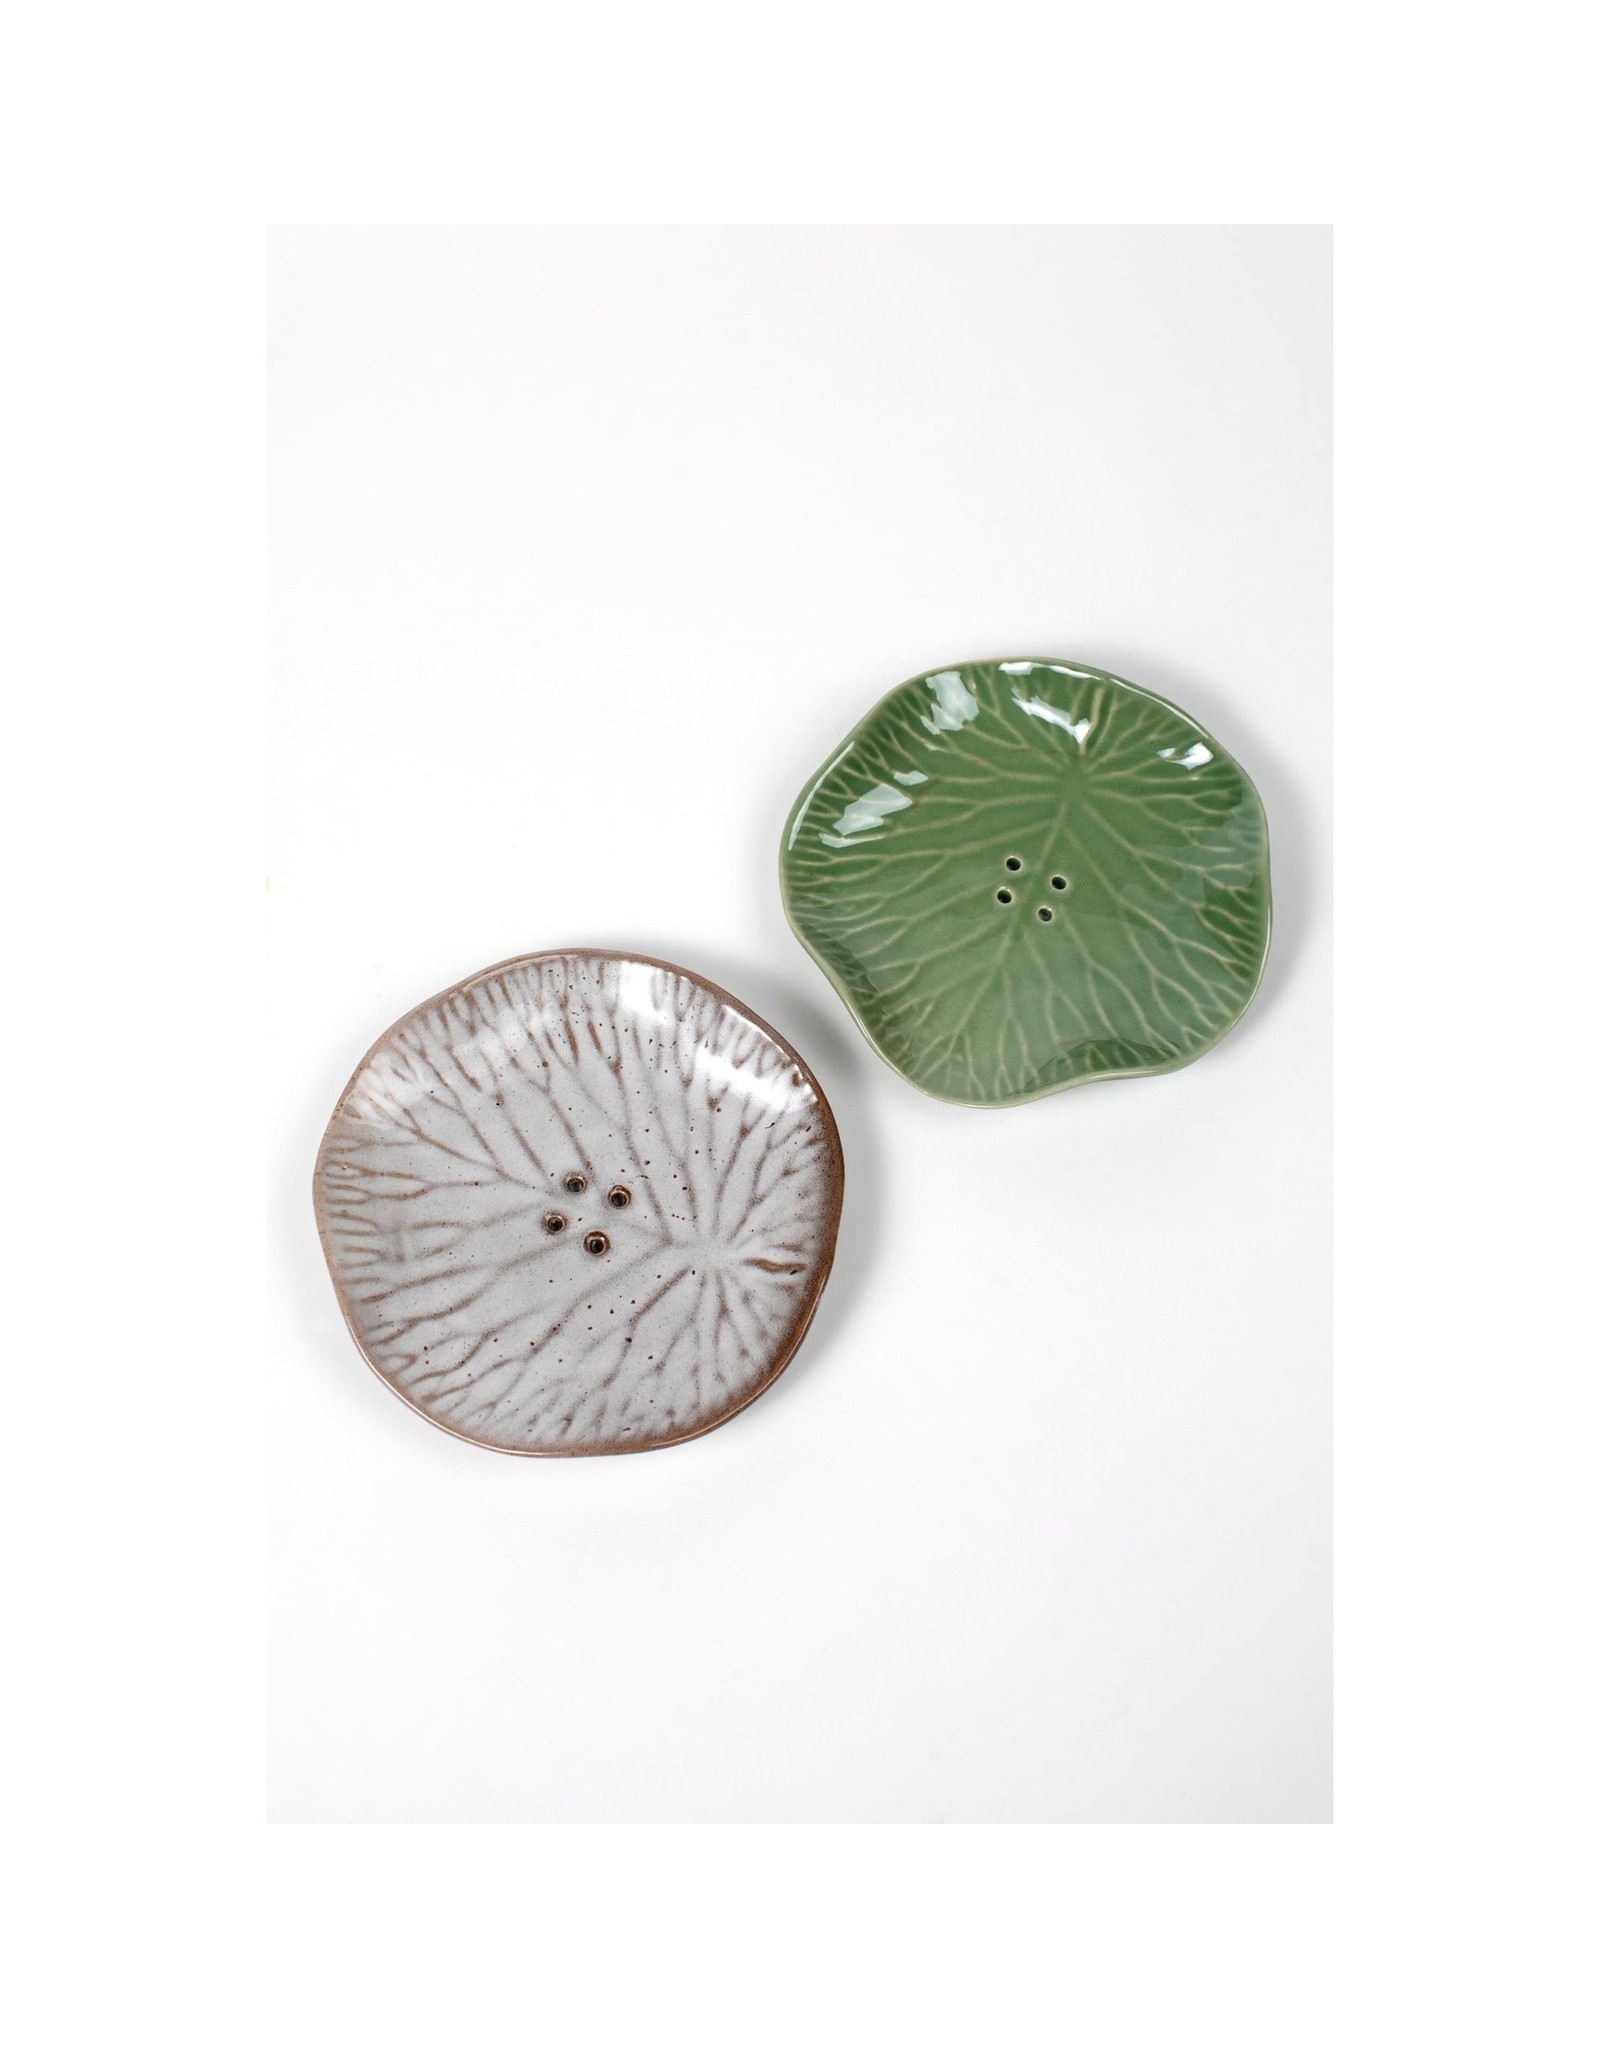 Indonesia Lily Pad Soap Dish, Indonesia.